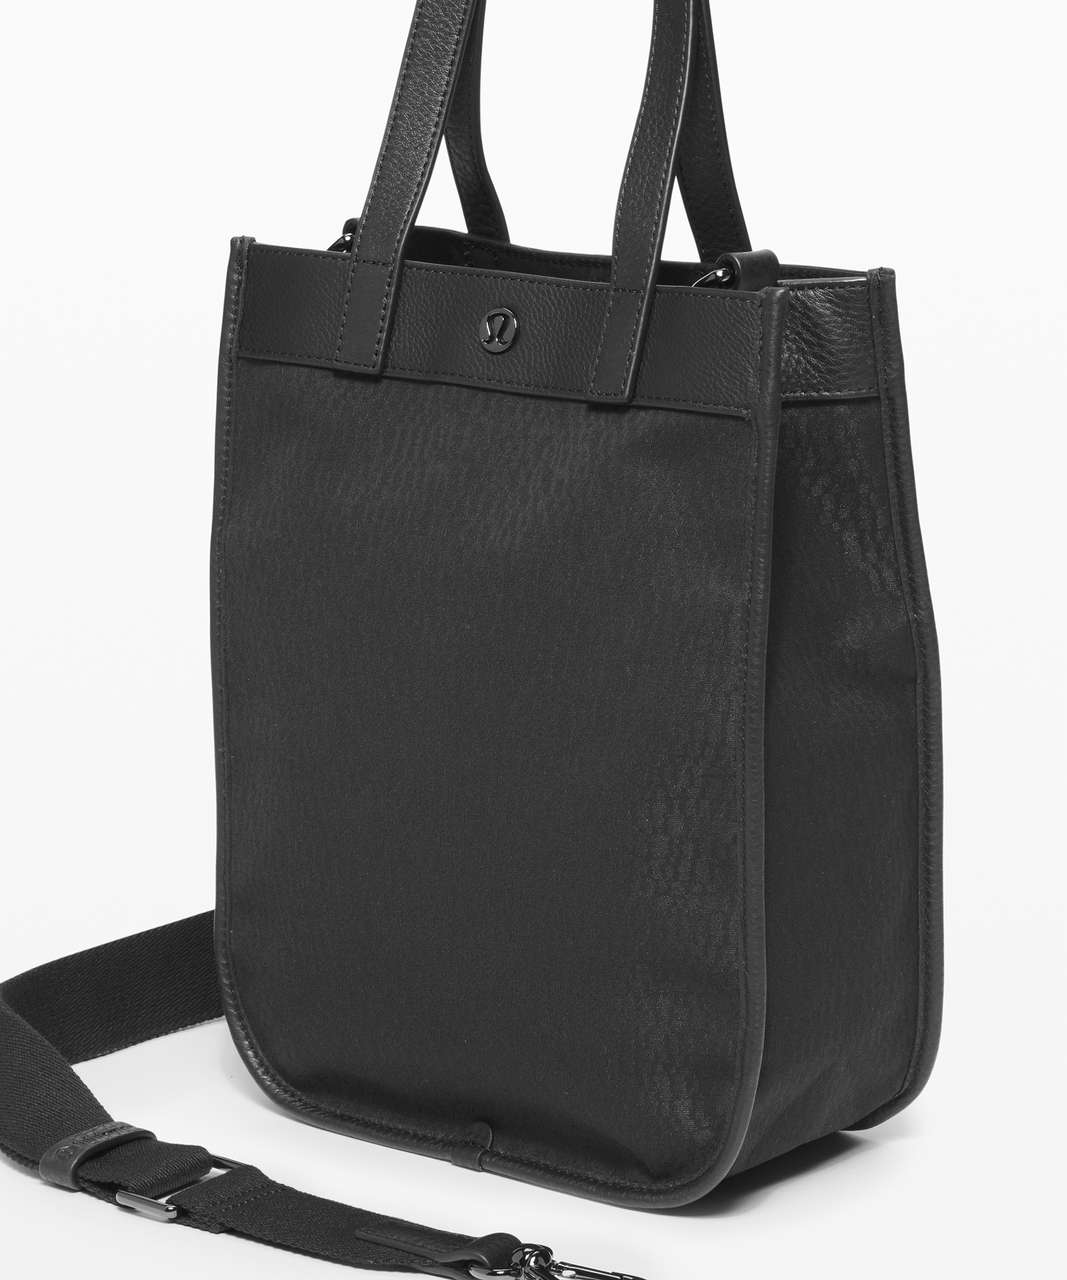 Lululemon Now And Always Tote Mini 8L - Stacked Jacquard Black Midnight